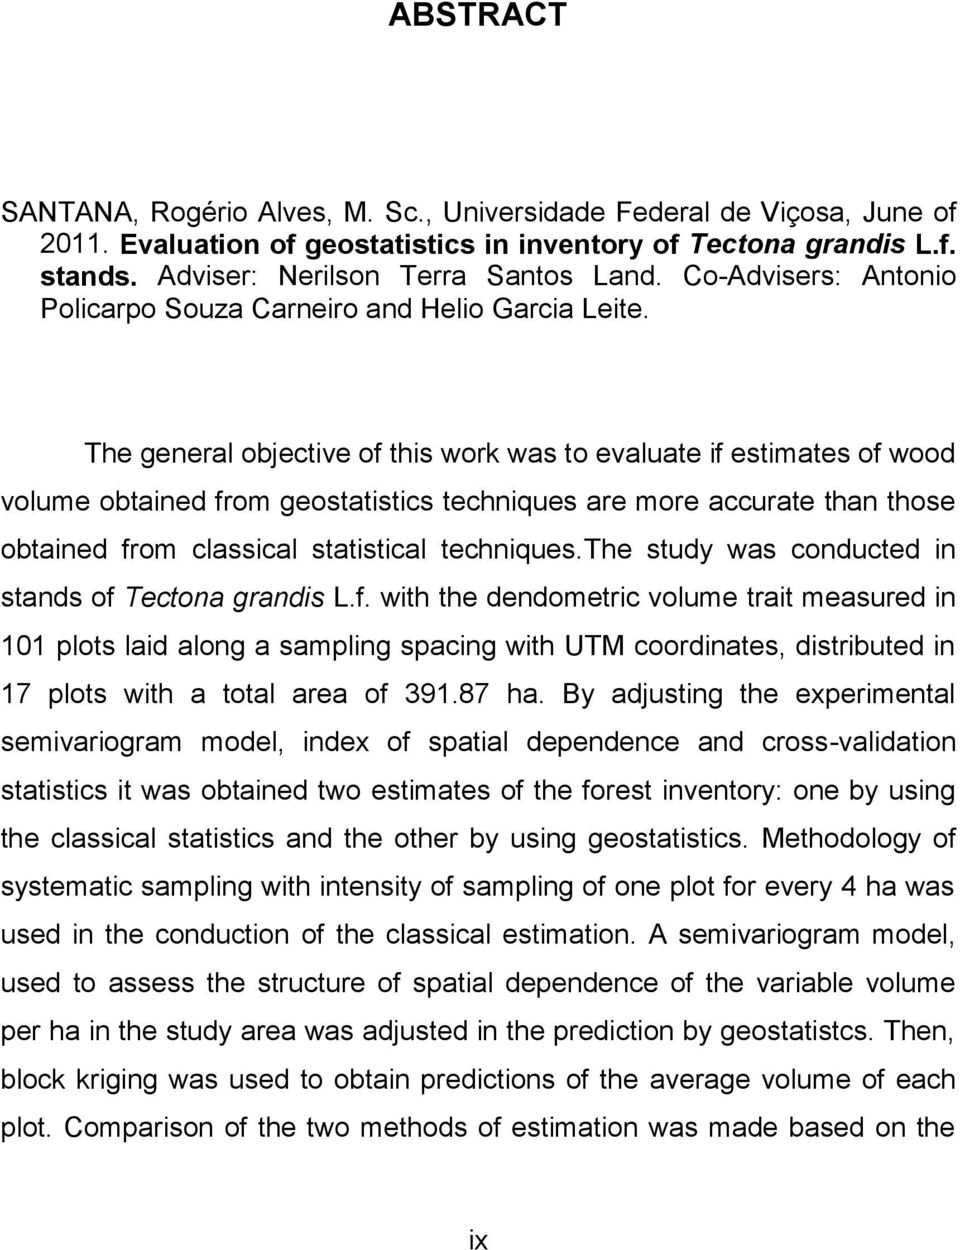 The general objectve of ths work was to evaluate f estmates of wood volume obtaned from geostatstcs technques are more accurate than those obtaned from classcal statstcal technques.